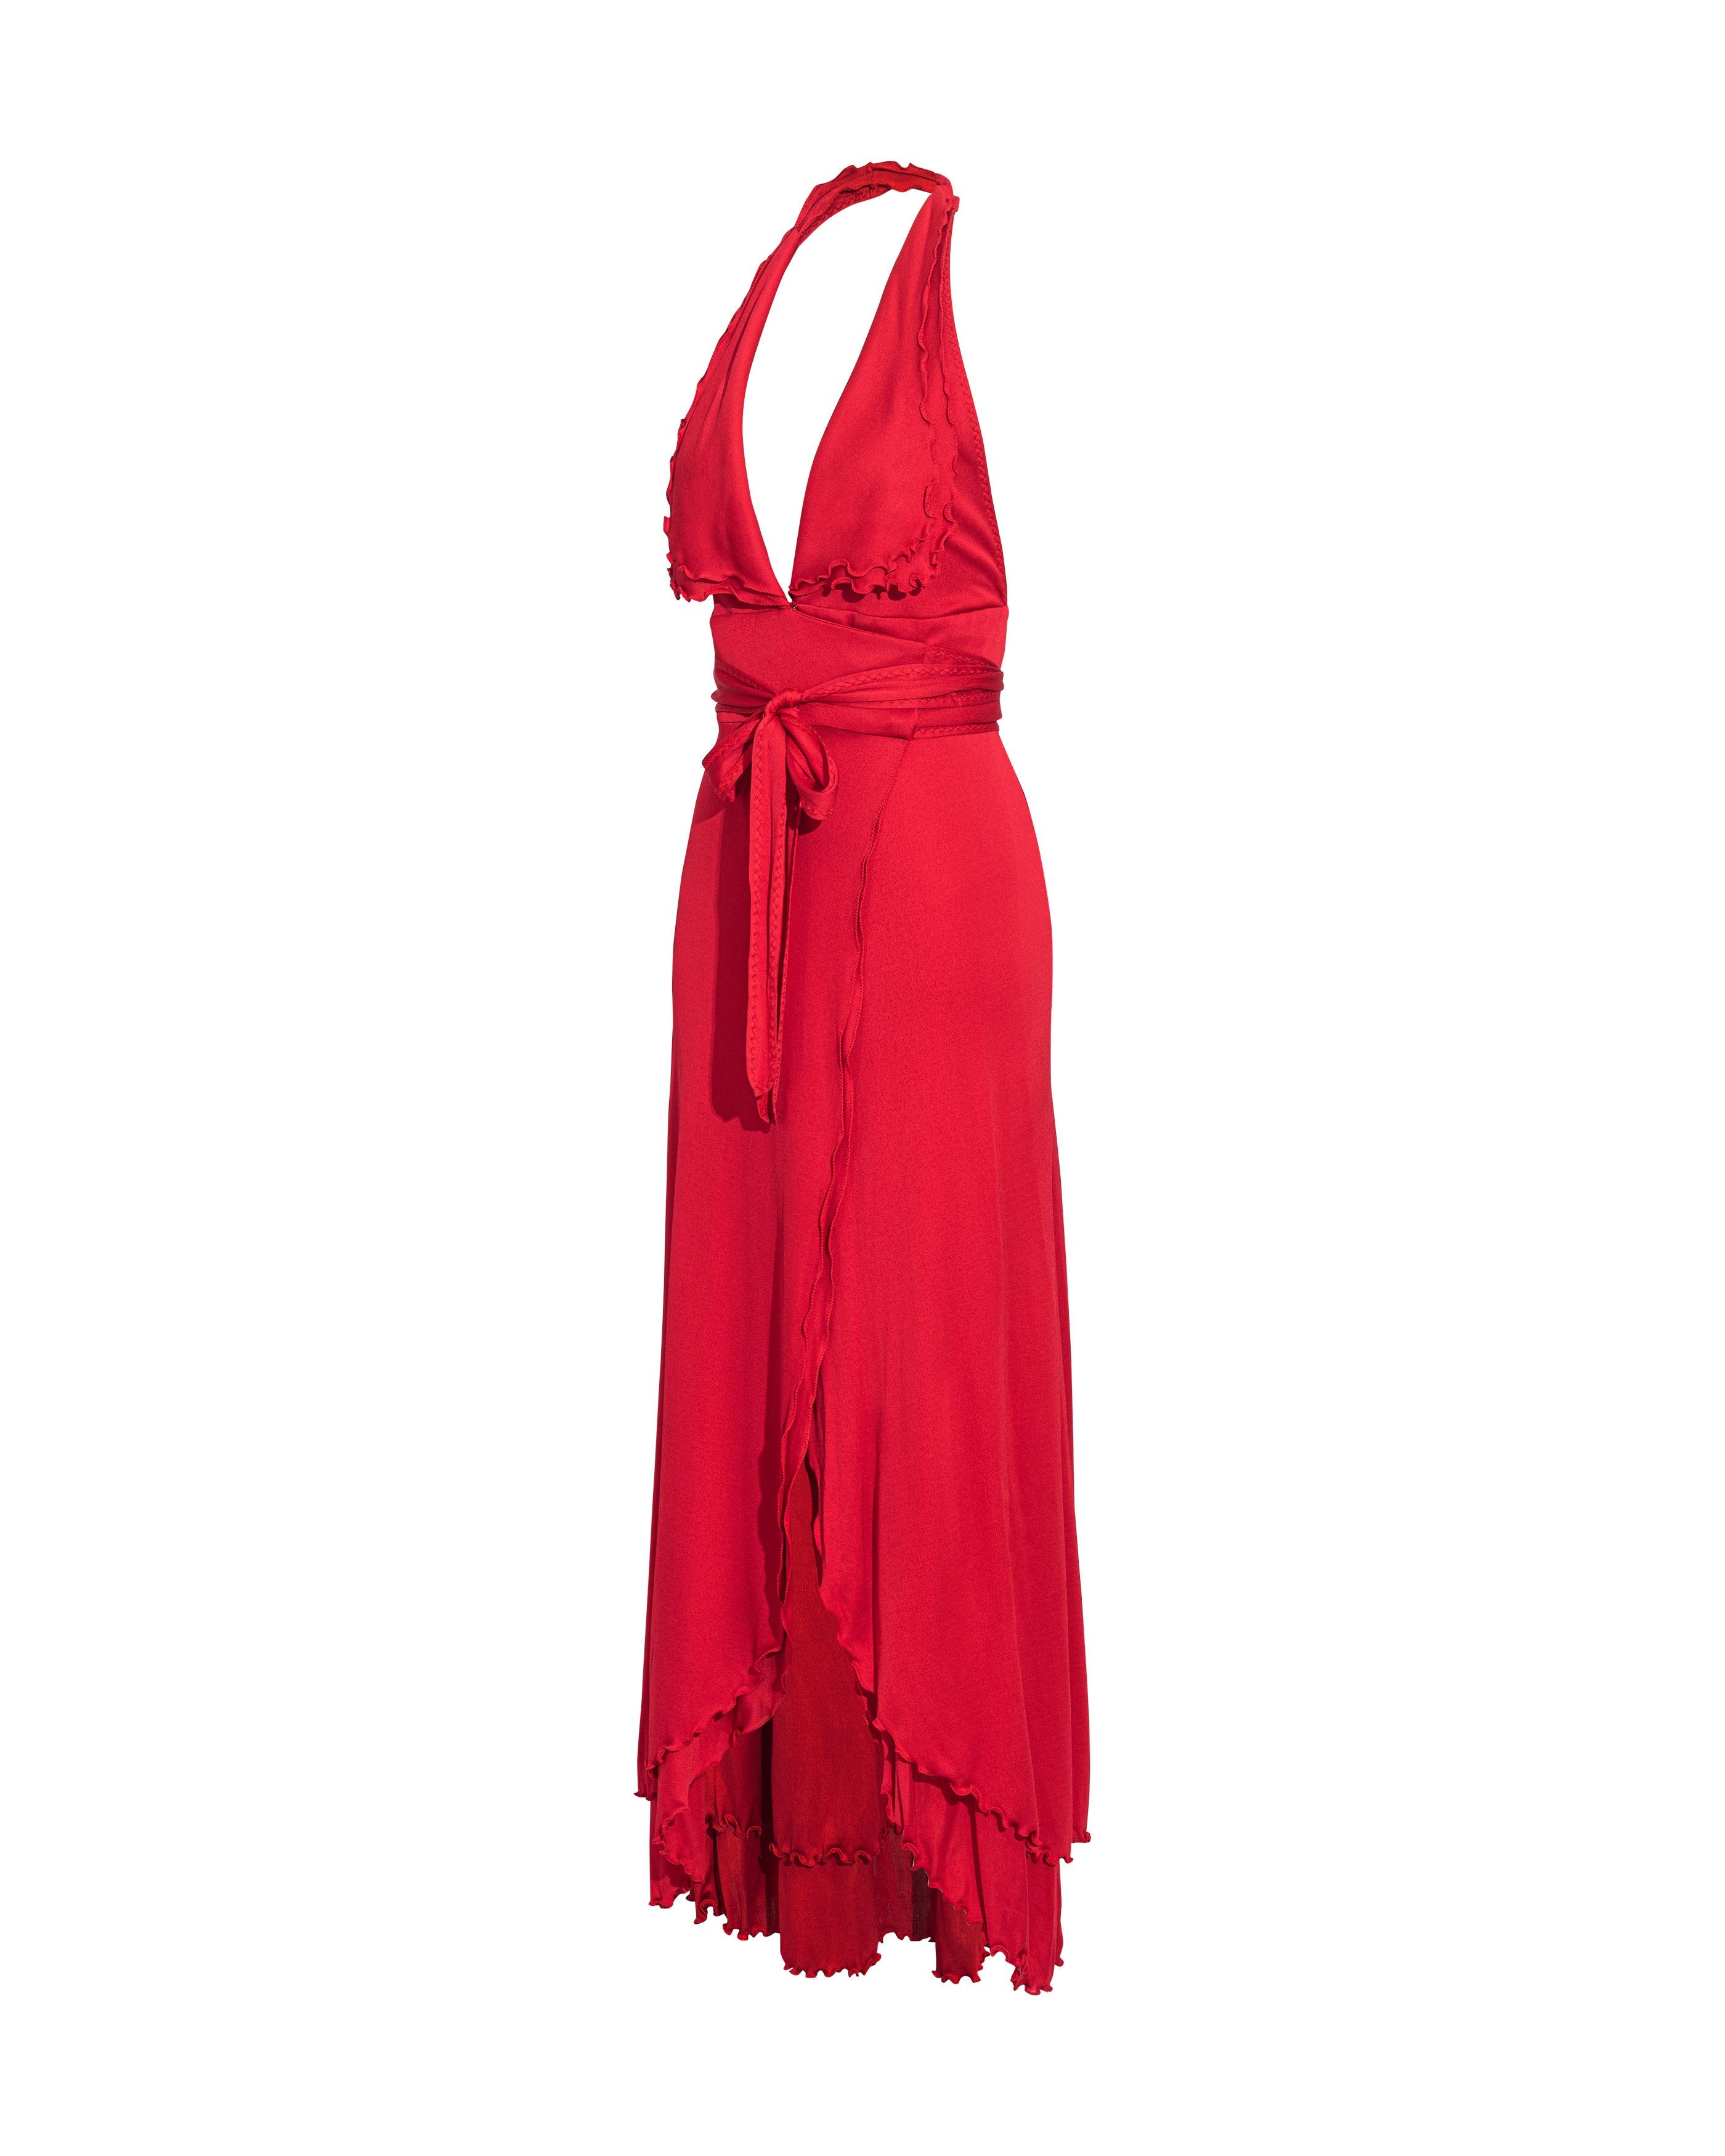 2000's Stephen Burrows (1970's Re-Issue) Red Halter Wrap Gown In Good Condition For Sale In North Hollywood, CA